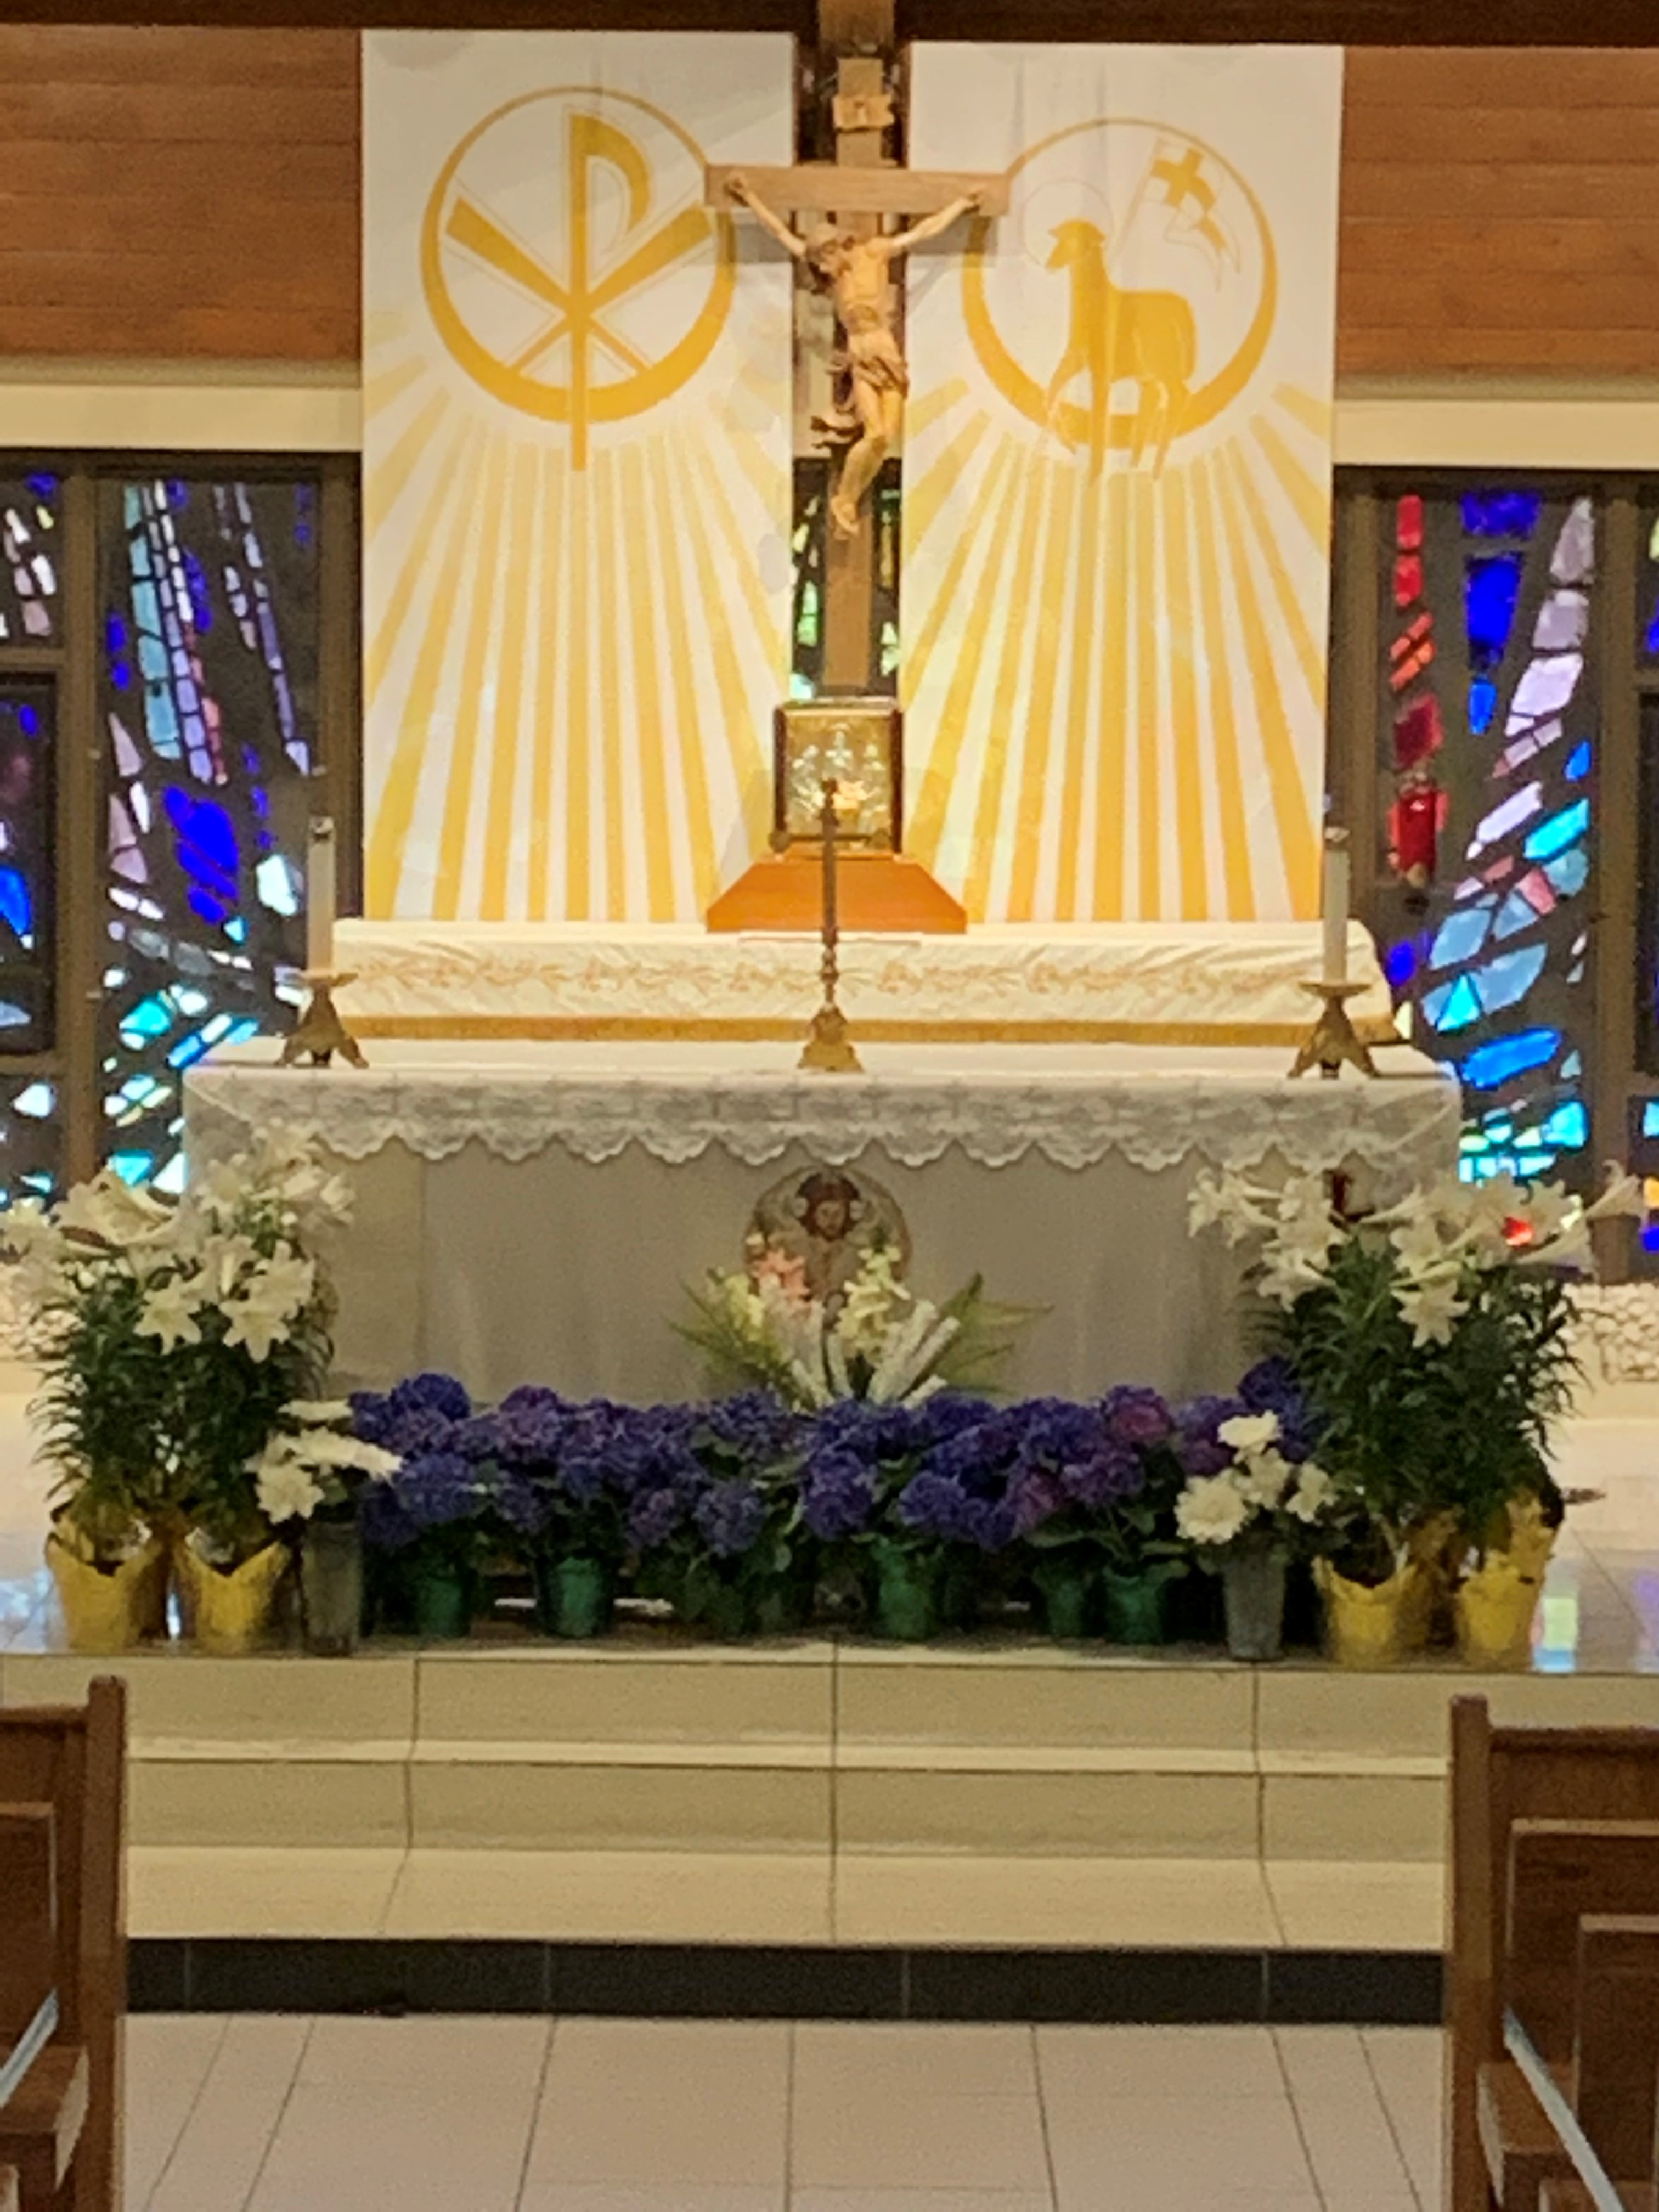 Easter Banners and Easter flowers decorate the Altar in the Sanctuary